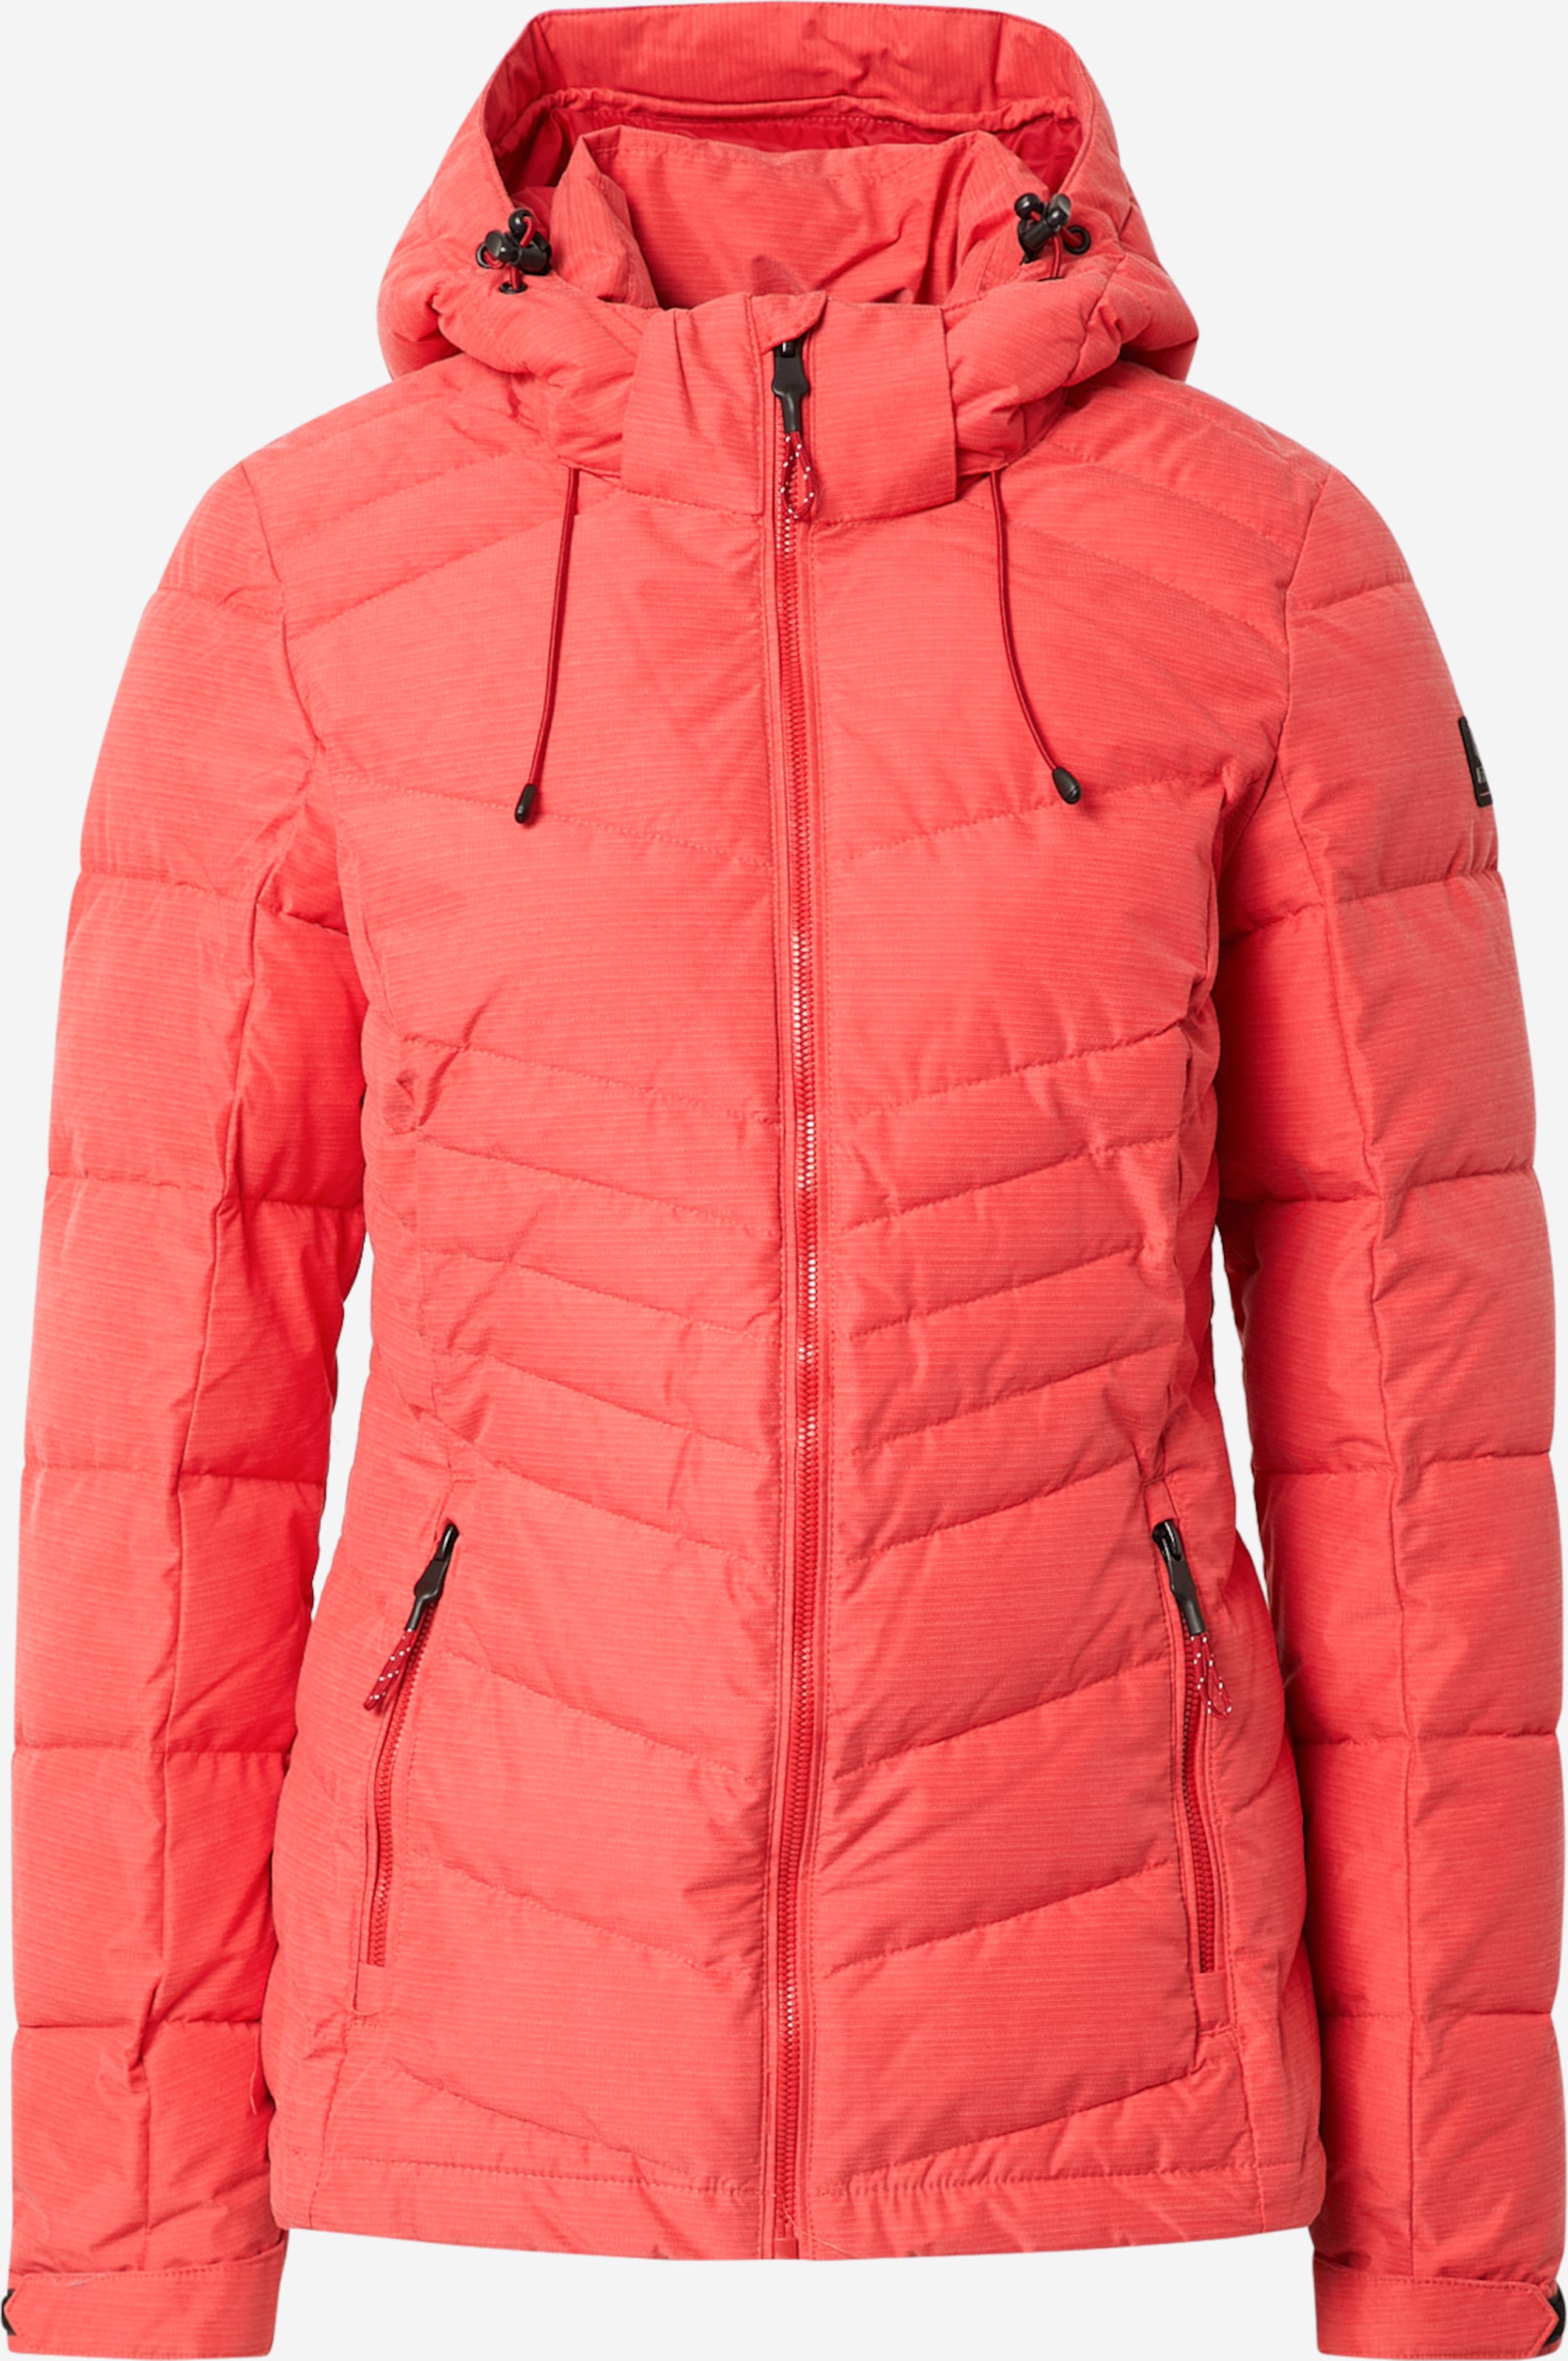 YOU KILLTEC Outdoor | Red in Jacket ABOUT Pastel